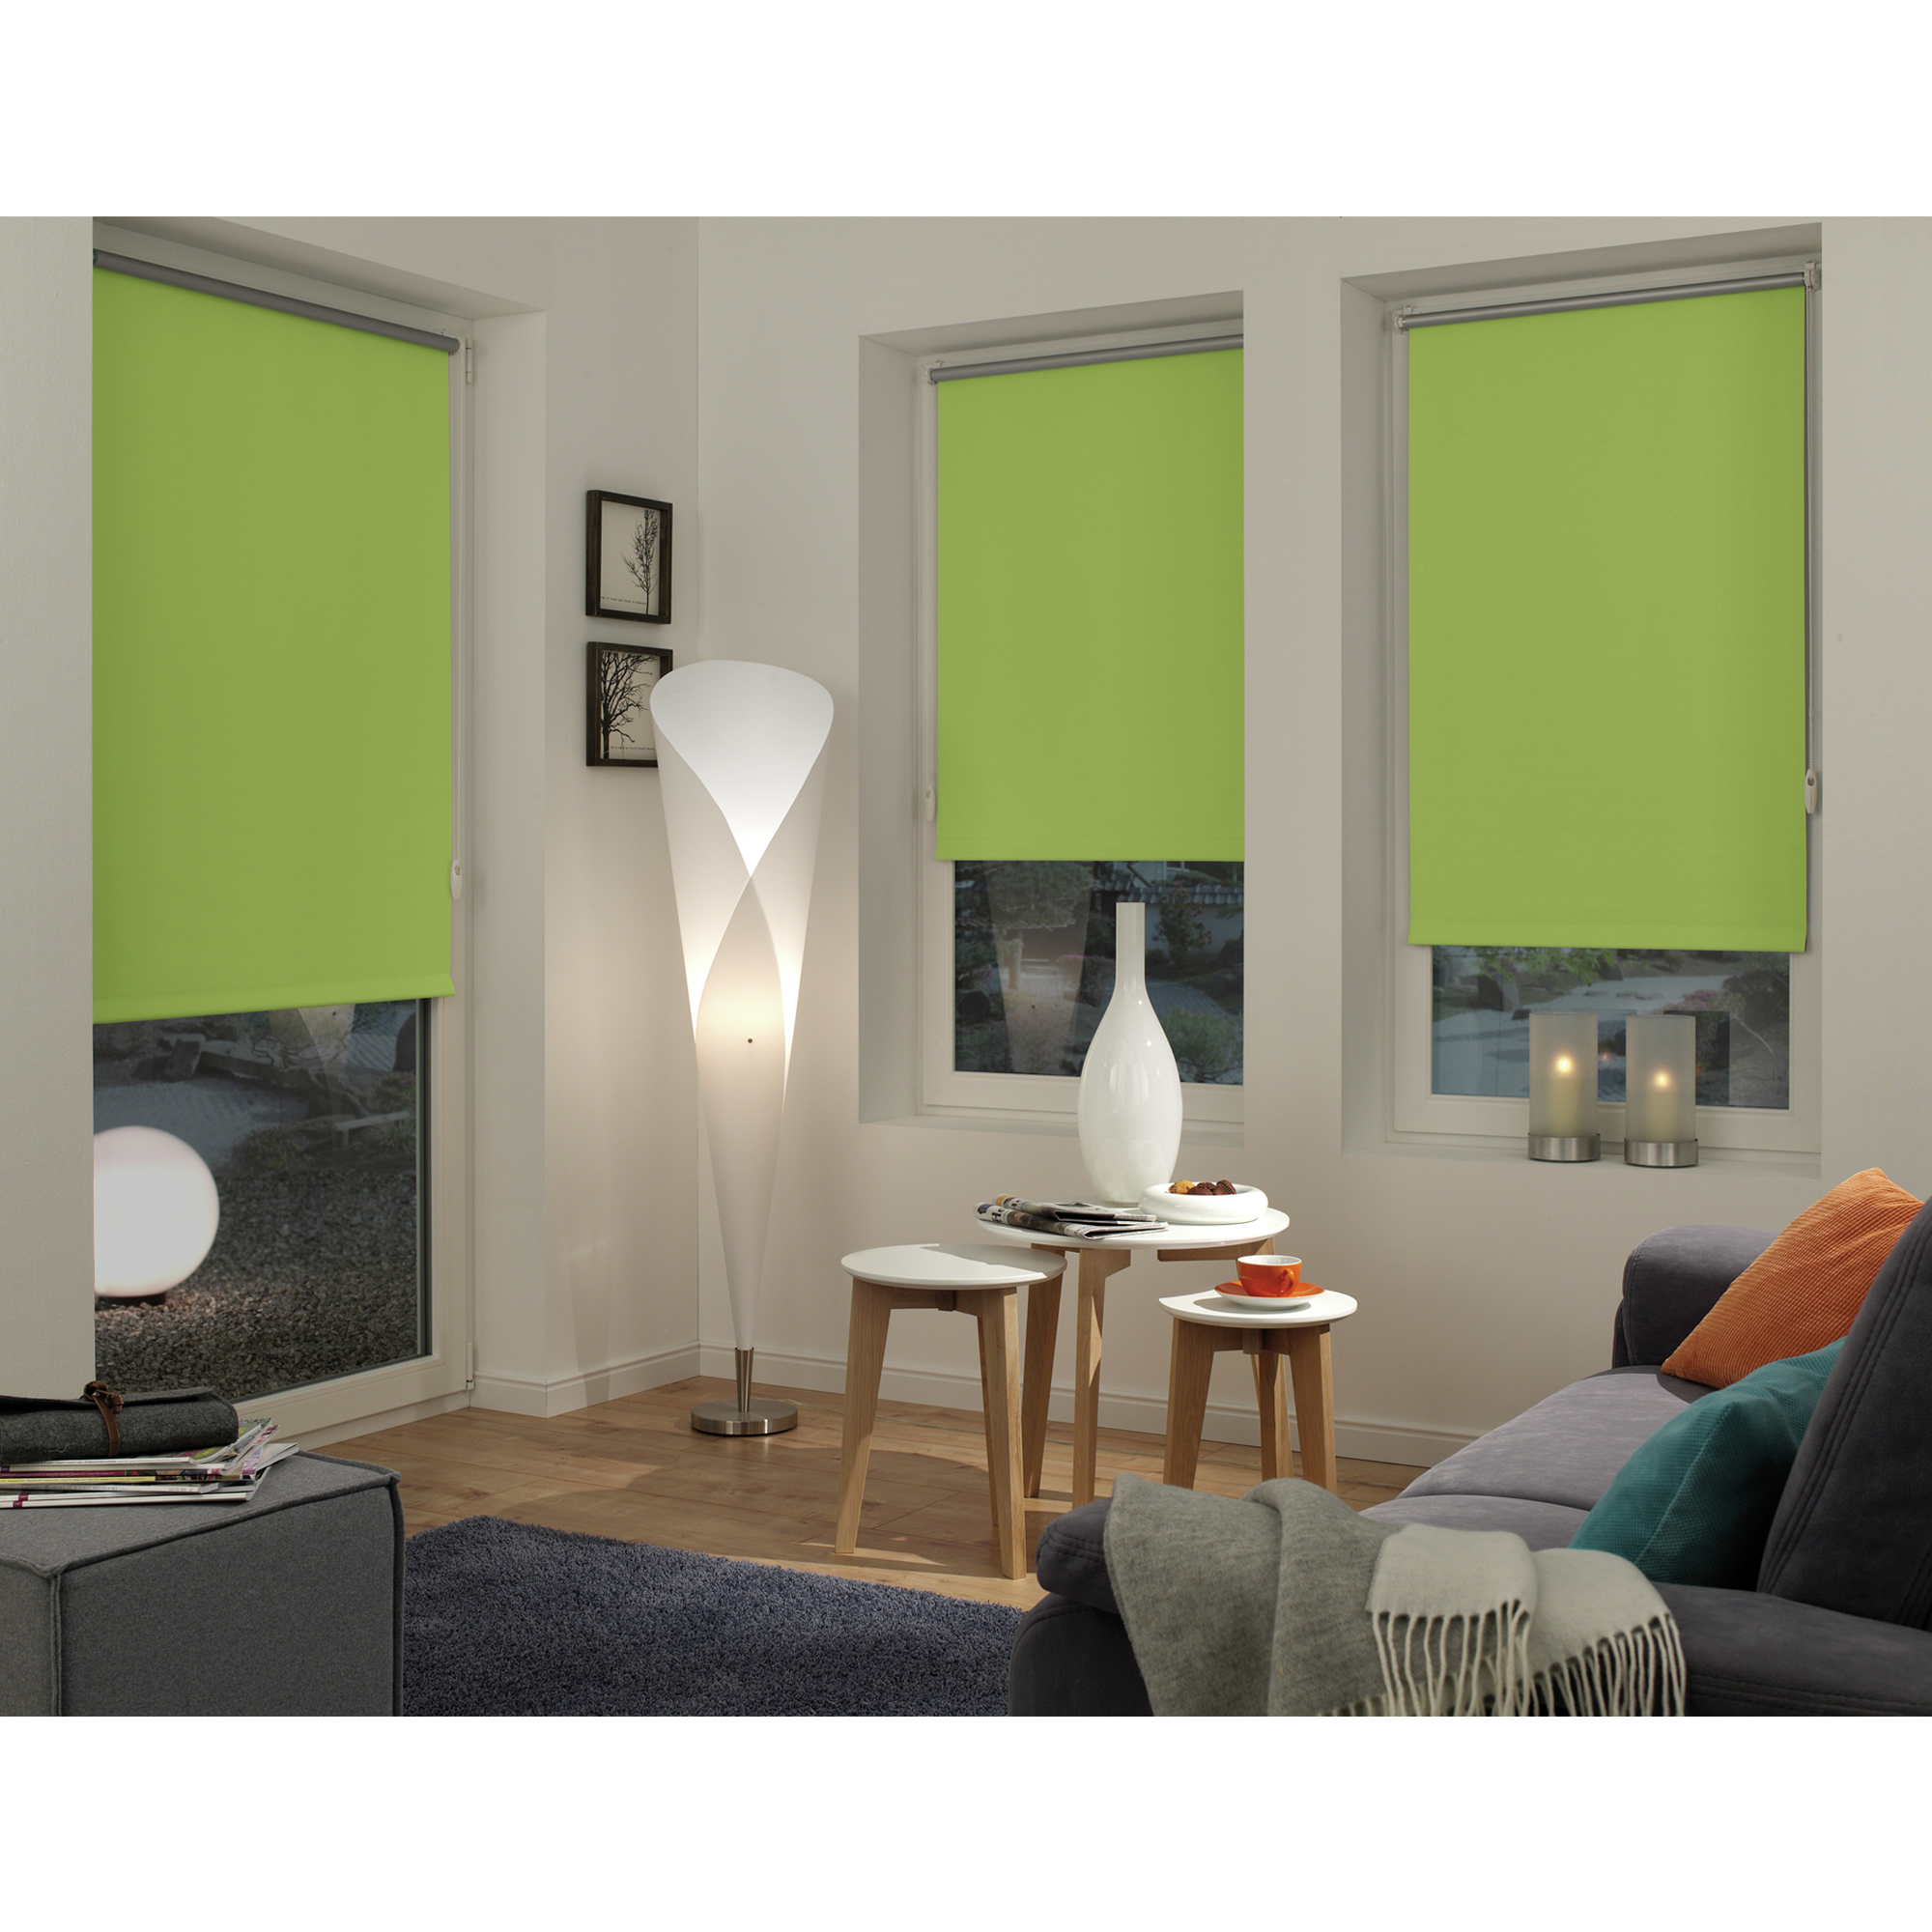 EasyFix Rollo 'Thermo energiesparend' apfel 75 x 150 cm + product picture